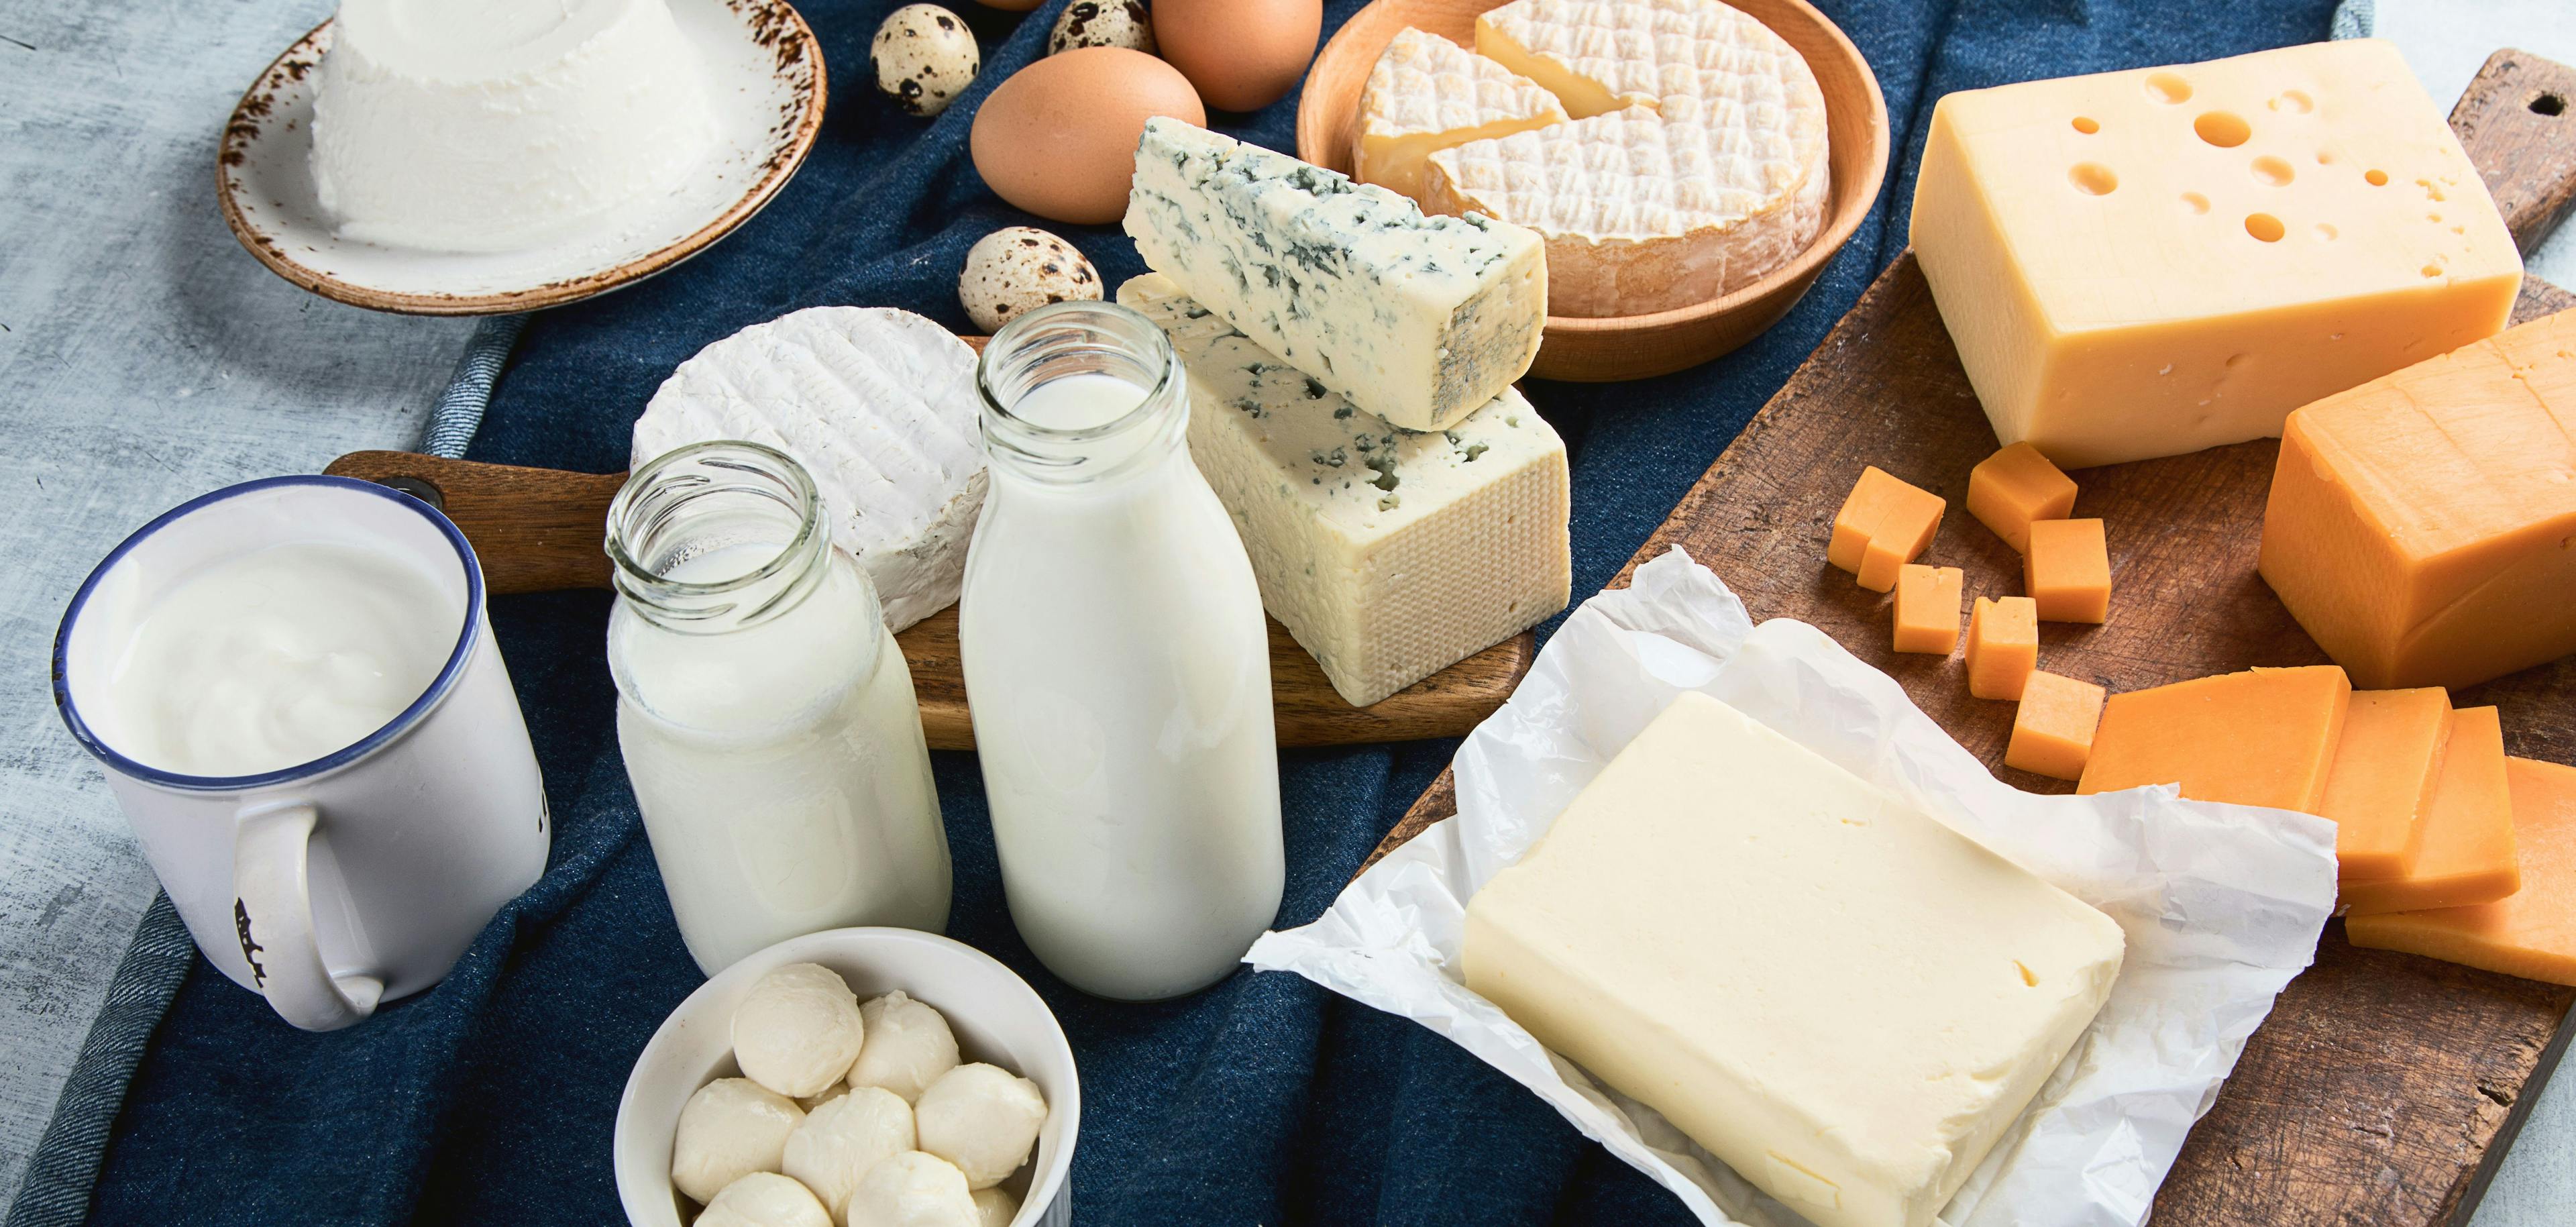 Different types of dairy products | Image Credit: © bit24 - stock.adobe.com.